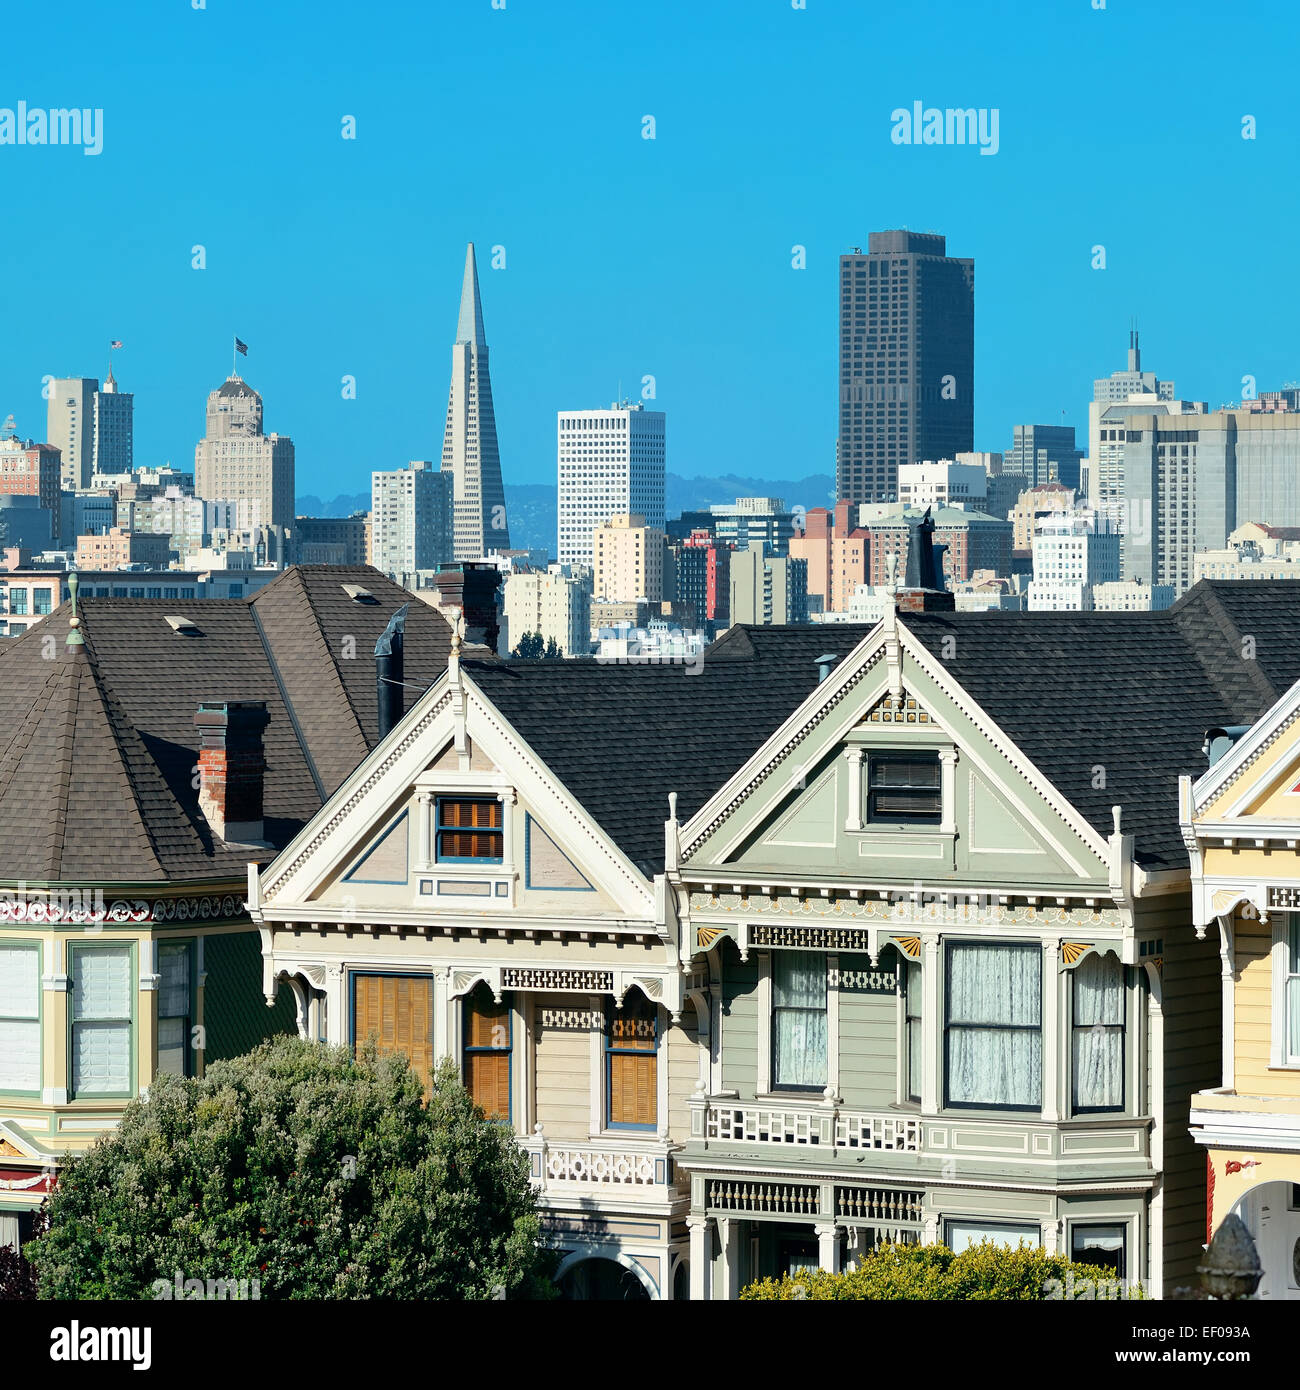 San Francisco city skyline with urban architectures viewed from Alamo Square. Stock Photo